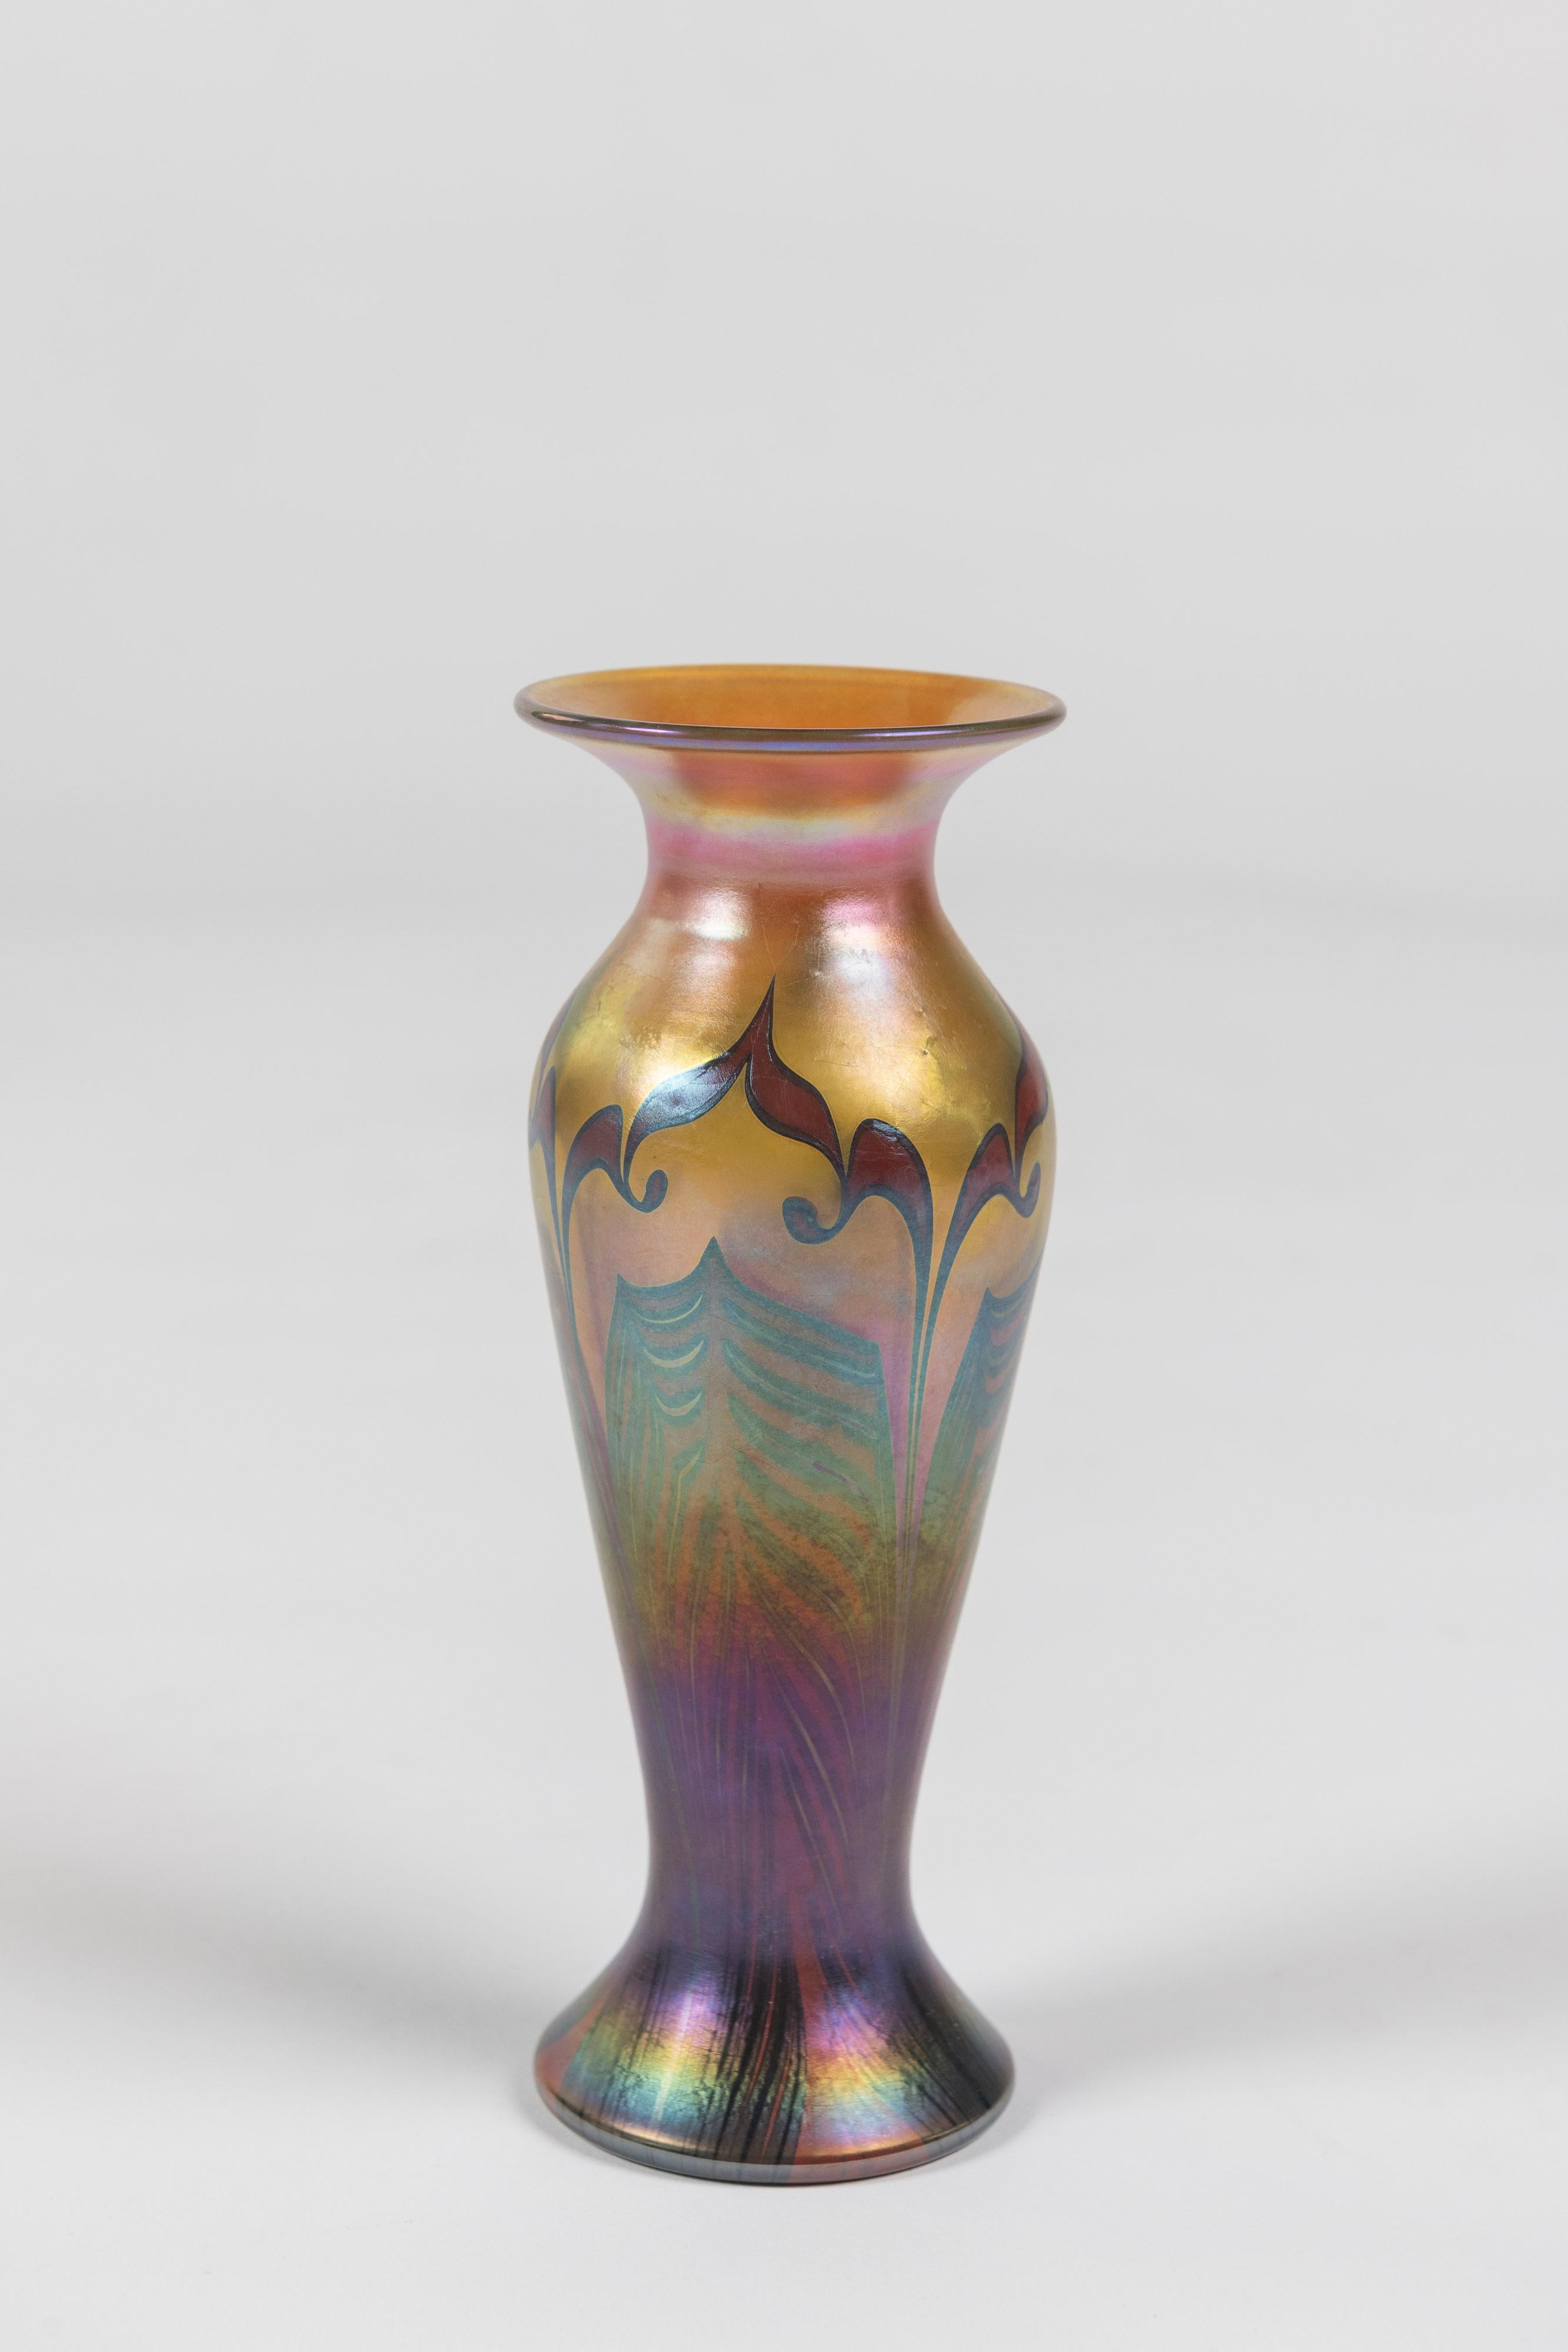 Popular classic pulled feather design art glass vase, made by Lundberg Studios of California, signed. Iridescent finish and inspired by Tiffany designs.